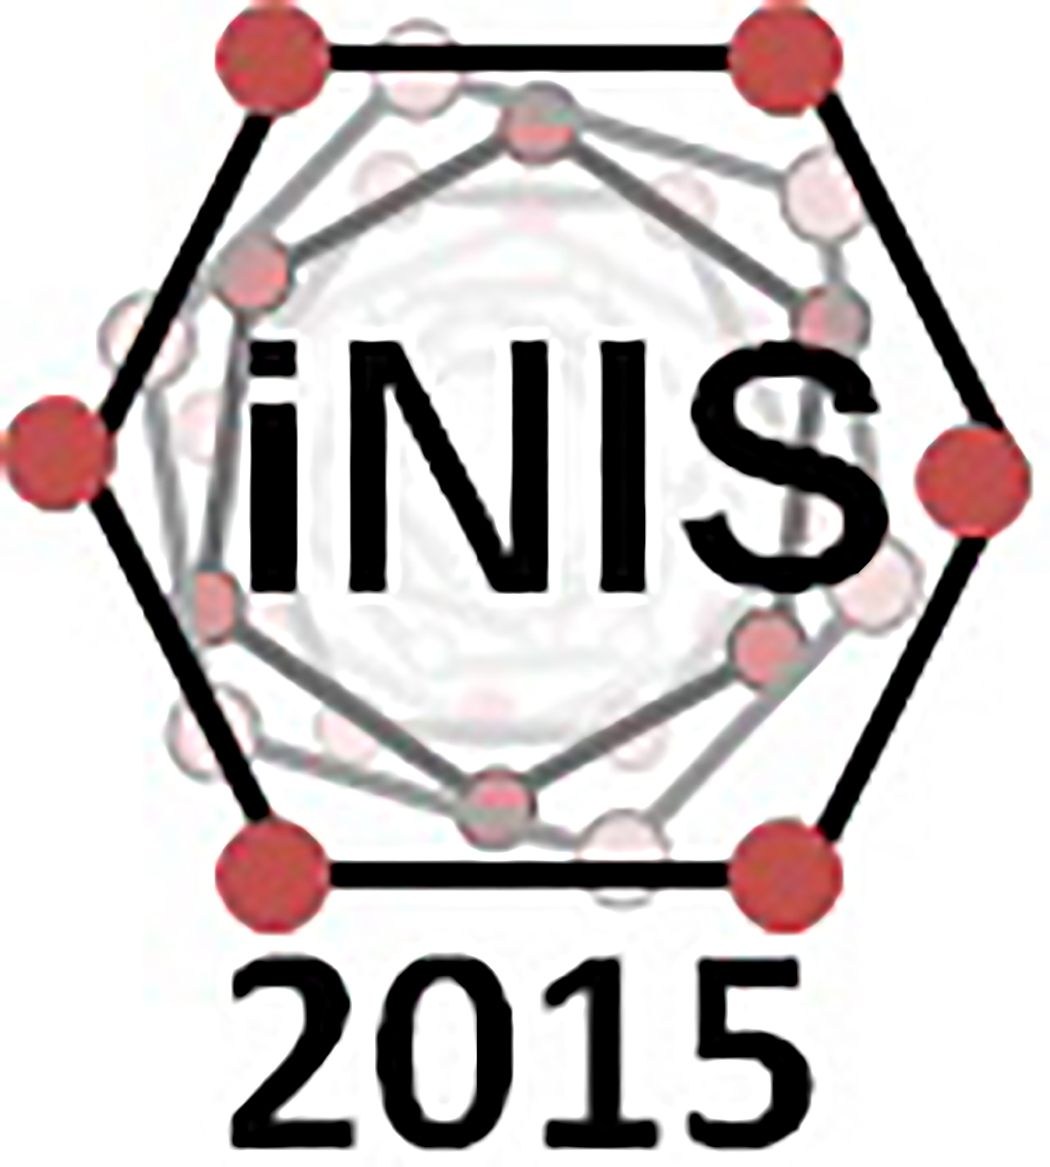 The primary objective of iNIS is aimed to provide a platform for both hardware and software researchers to interact under one umbrella for further development of efficient and secure information processing circuits and systems. iNIS 2015 is sponsored by IEEE Computer Society (IEEE-CS) under the technical committee on VLSI (TCVLSI) and technically co-sponsorship by IEEE Circuits and Systems Society (IEEE-CAS) as well as IEEE Council on EDA (IEEE-CEDA).